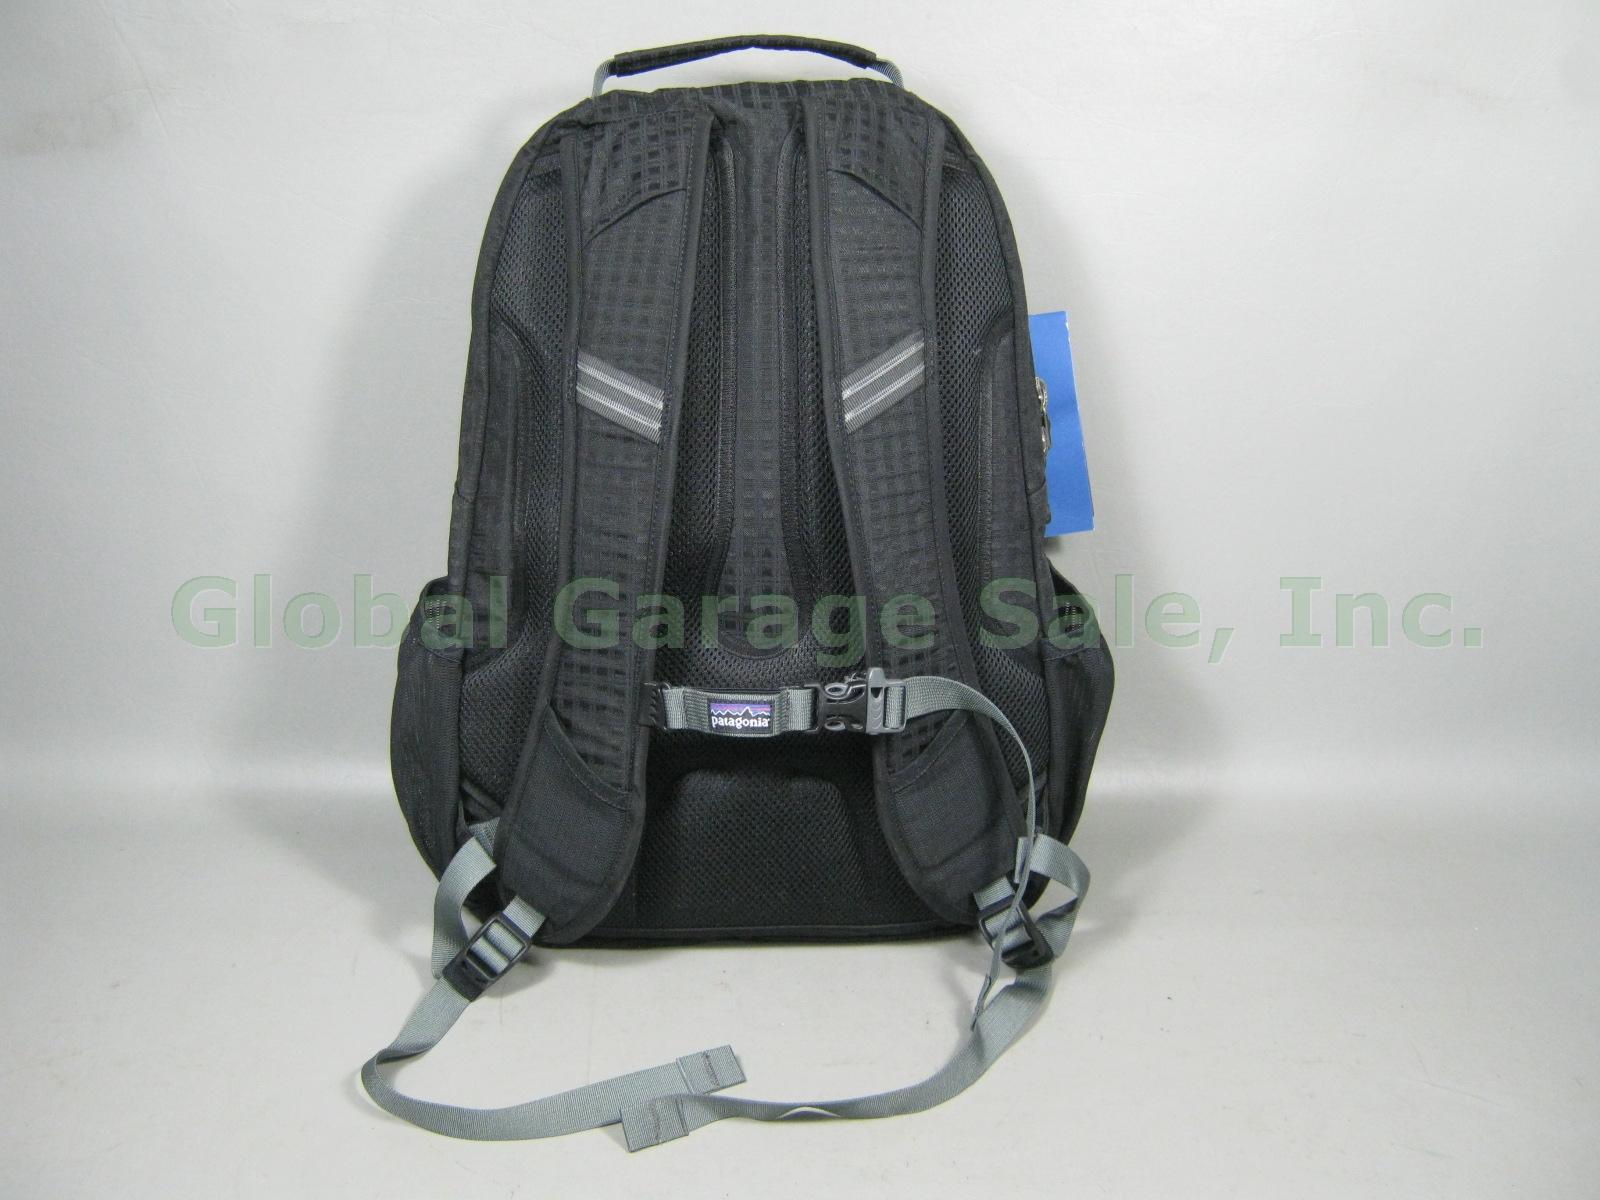 NWT Patagonia ALL Lightwire Backpack Laptop Computer Book School Bag Day Pack NR 4